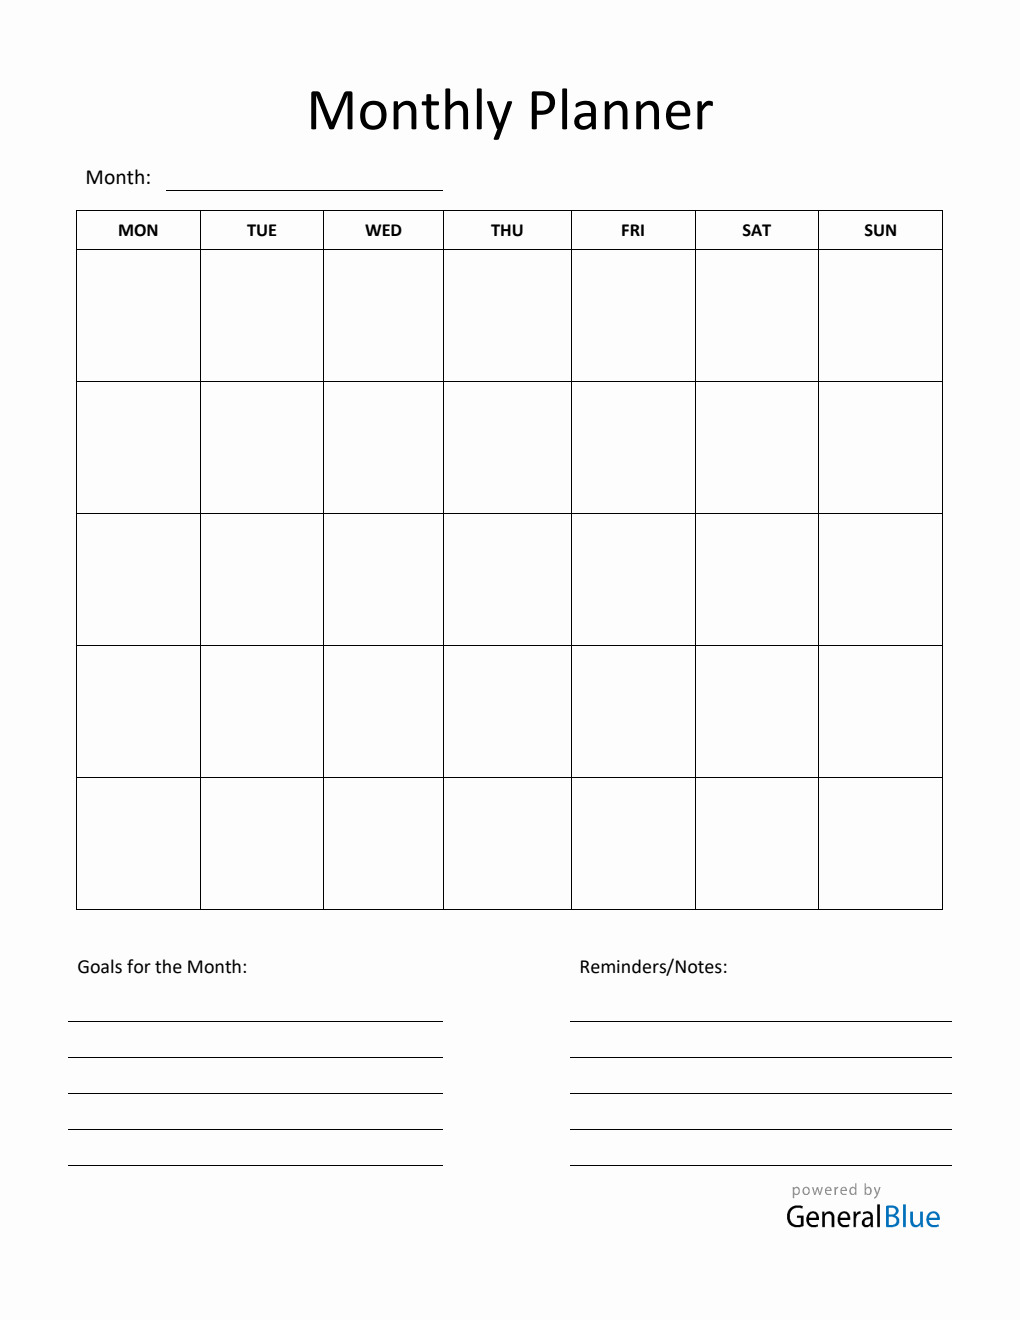 Monthly Planner in PDF